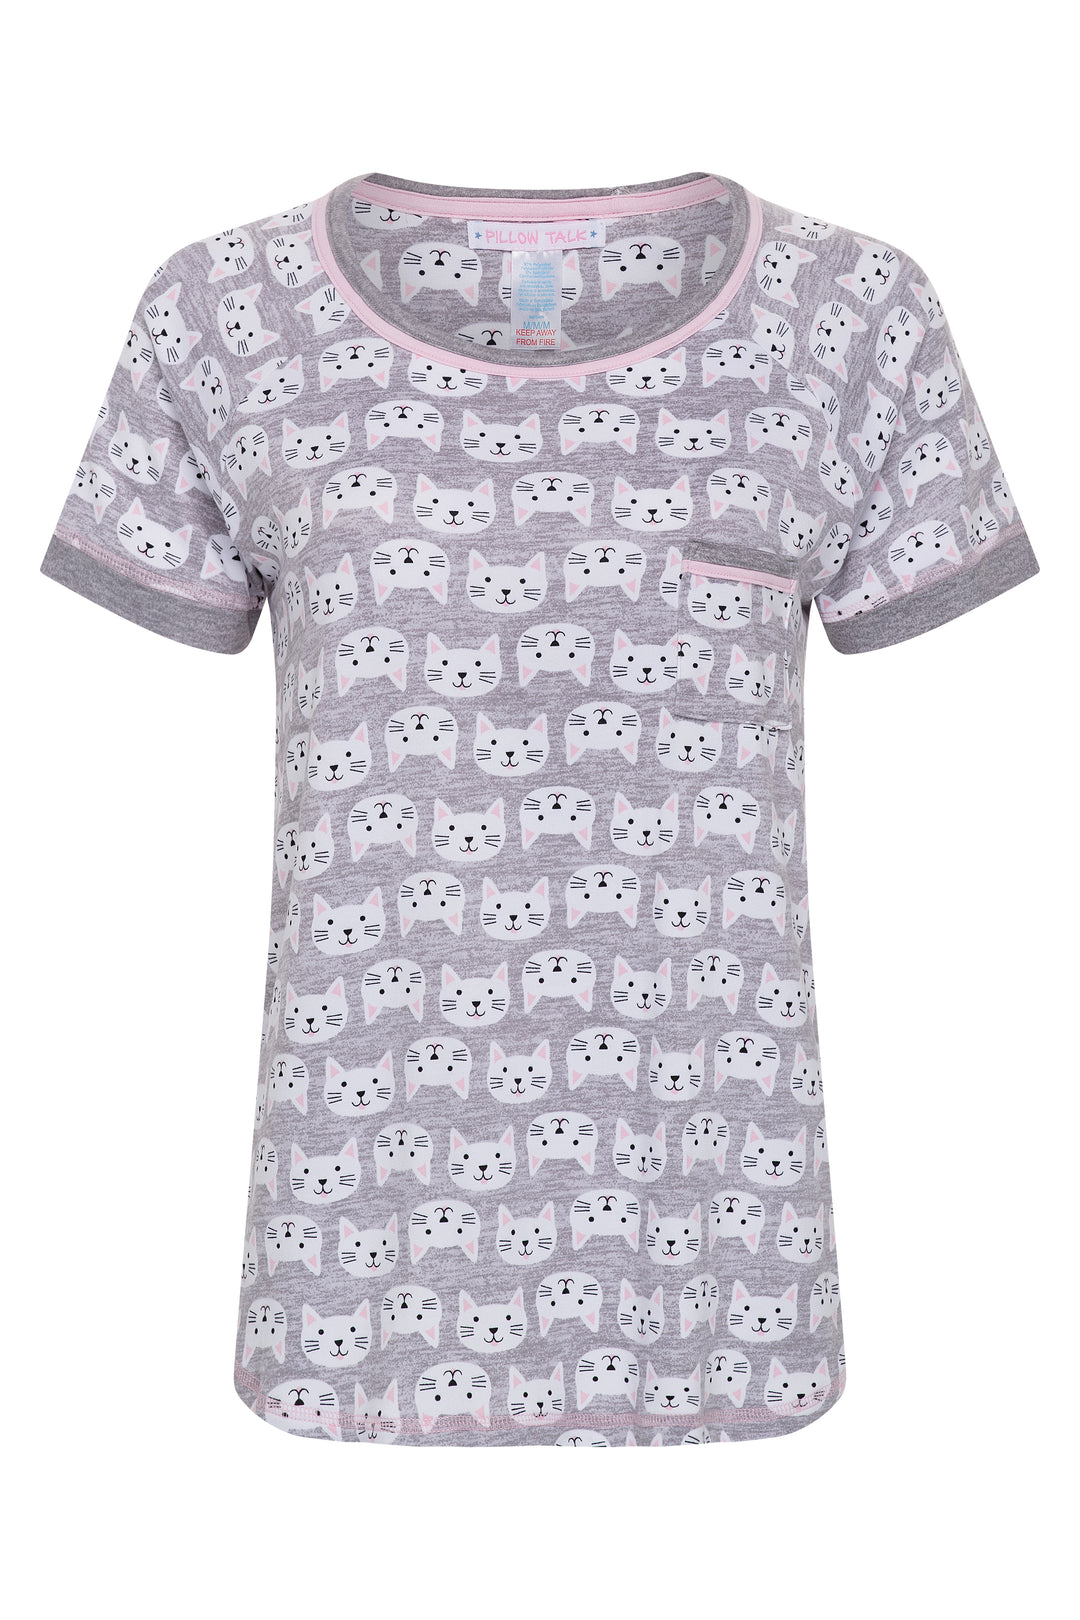 Cats patterned grey shirt as part of the René Rofé 2 Pack Lightweight Shirt Set in Pink Camo pattern